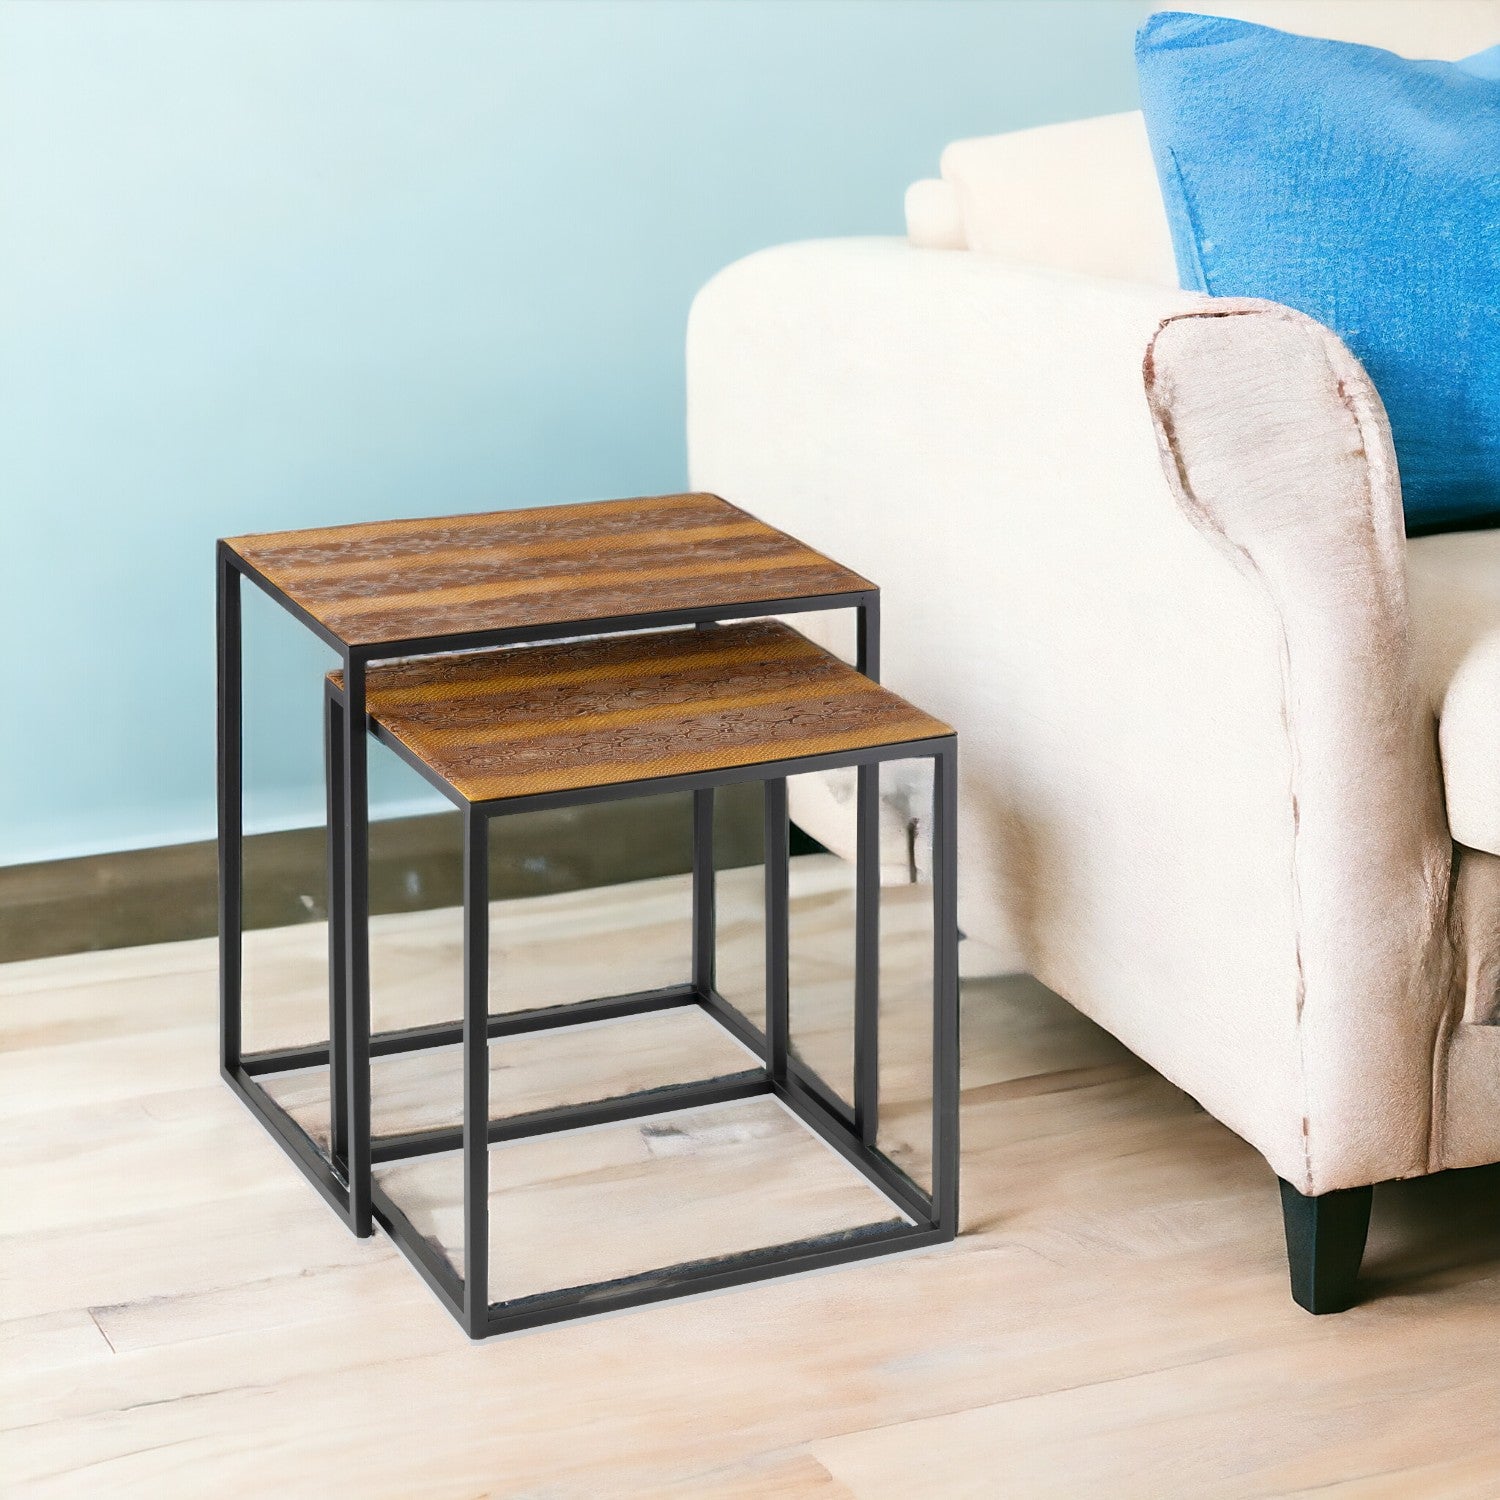 22" Black And Brown Resin End Table